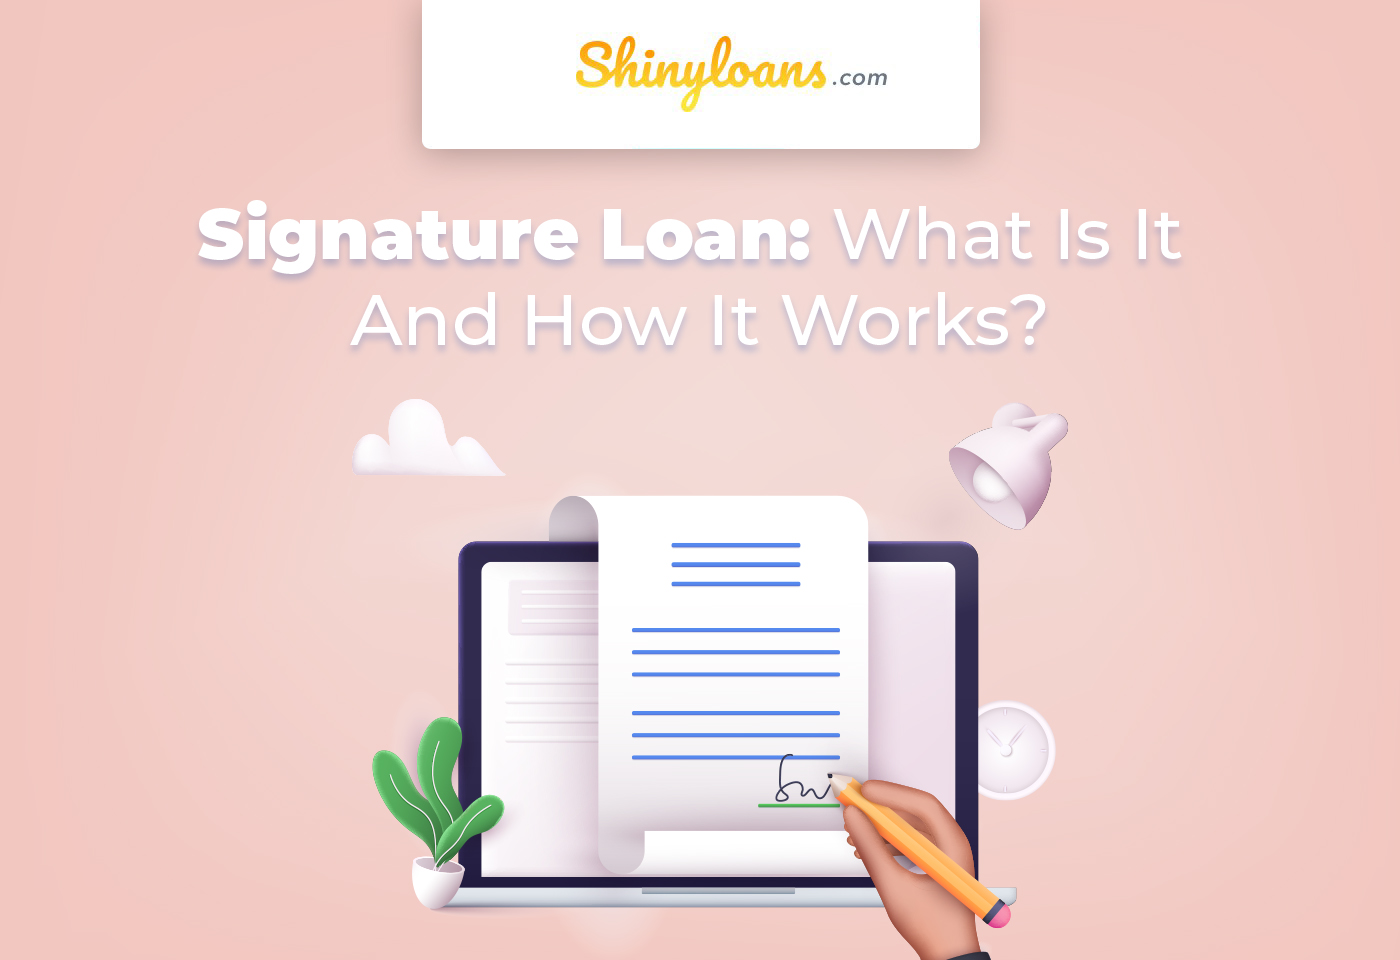 Signature loan - what is it?